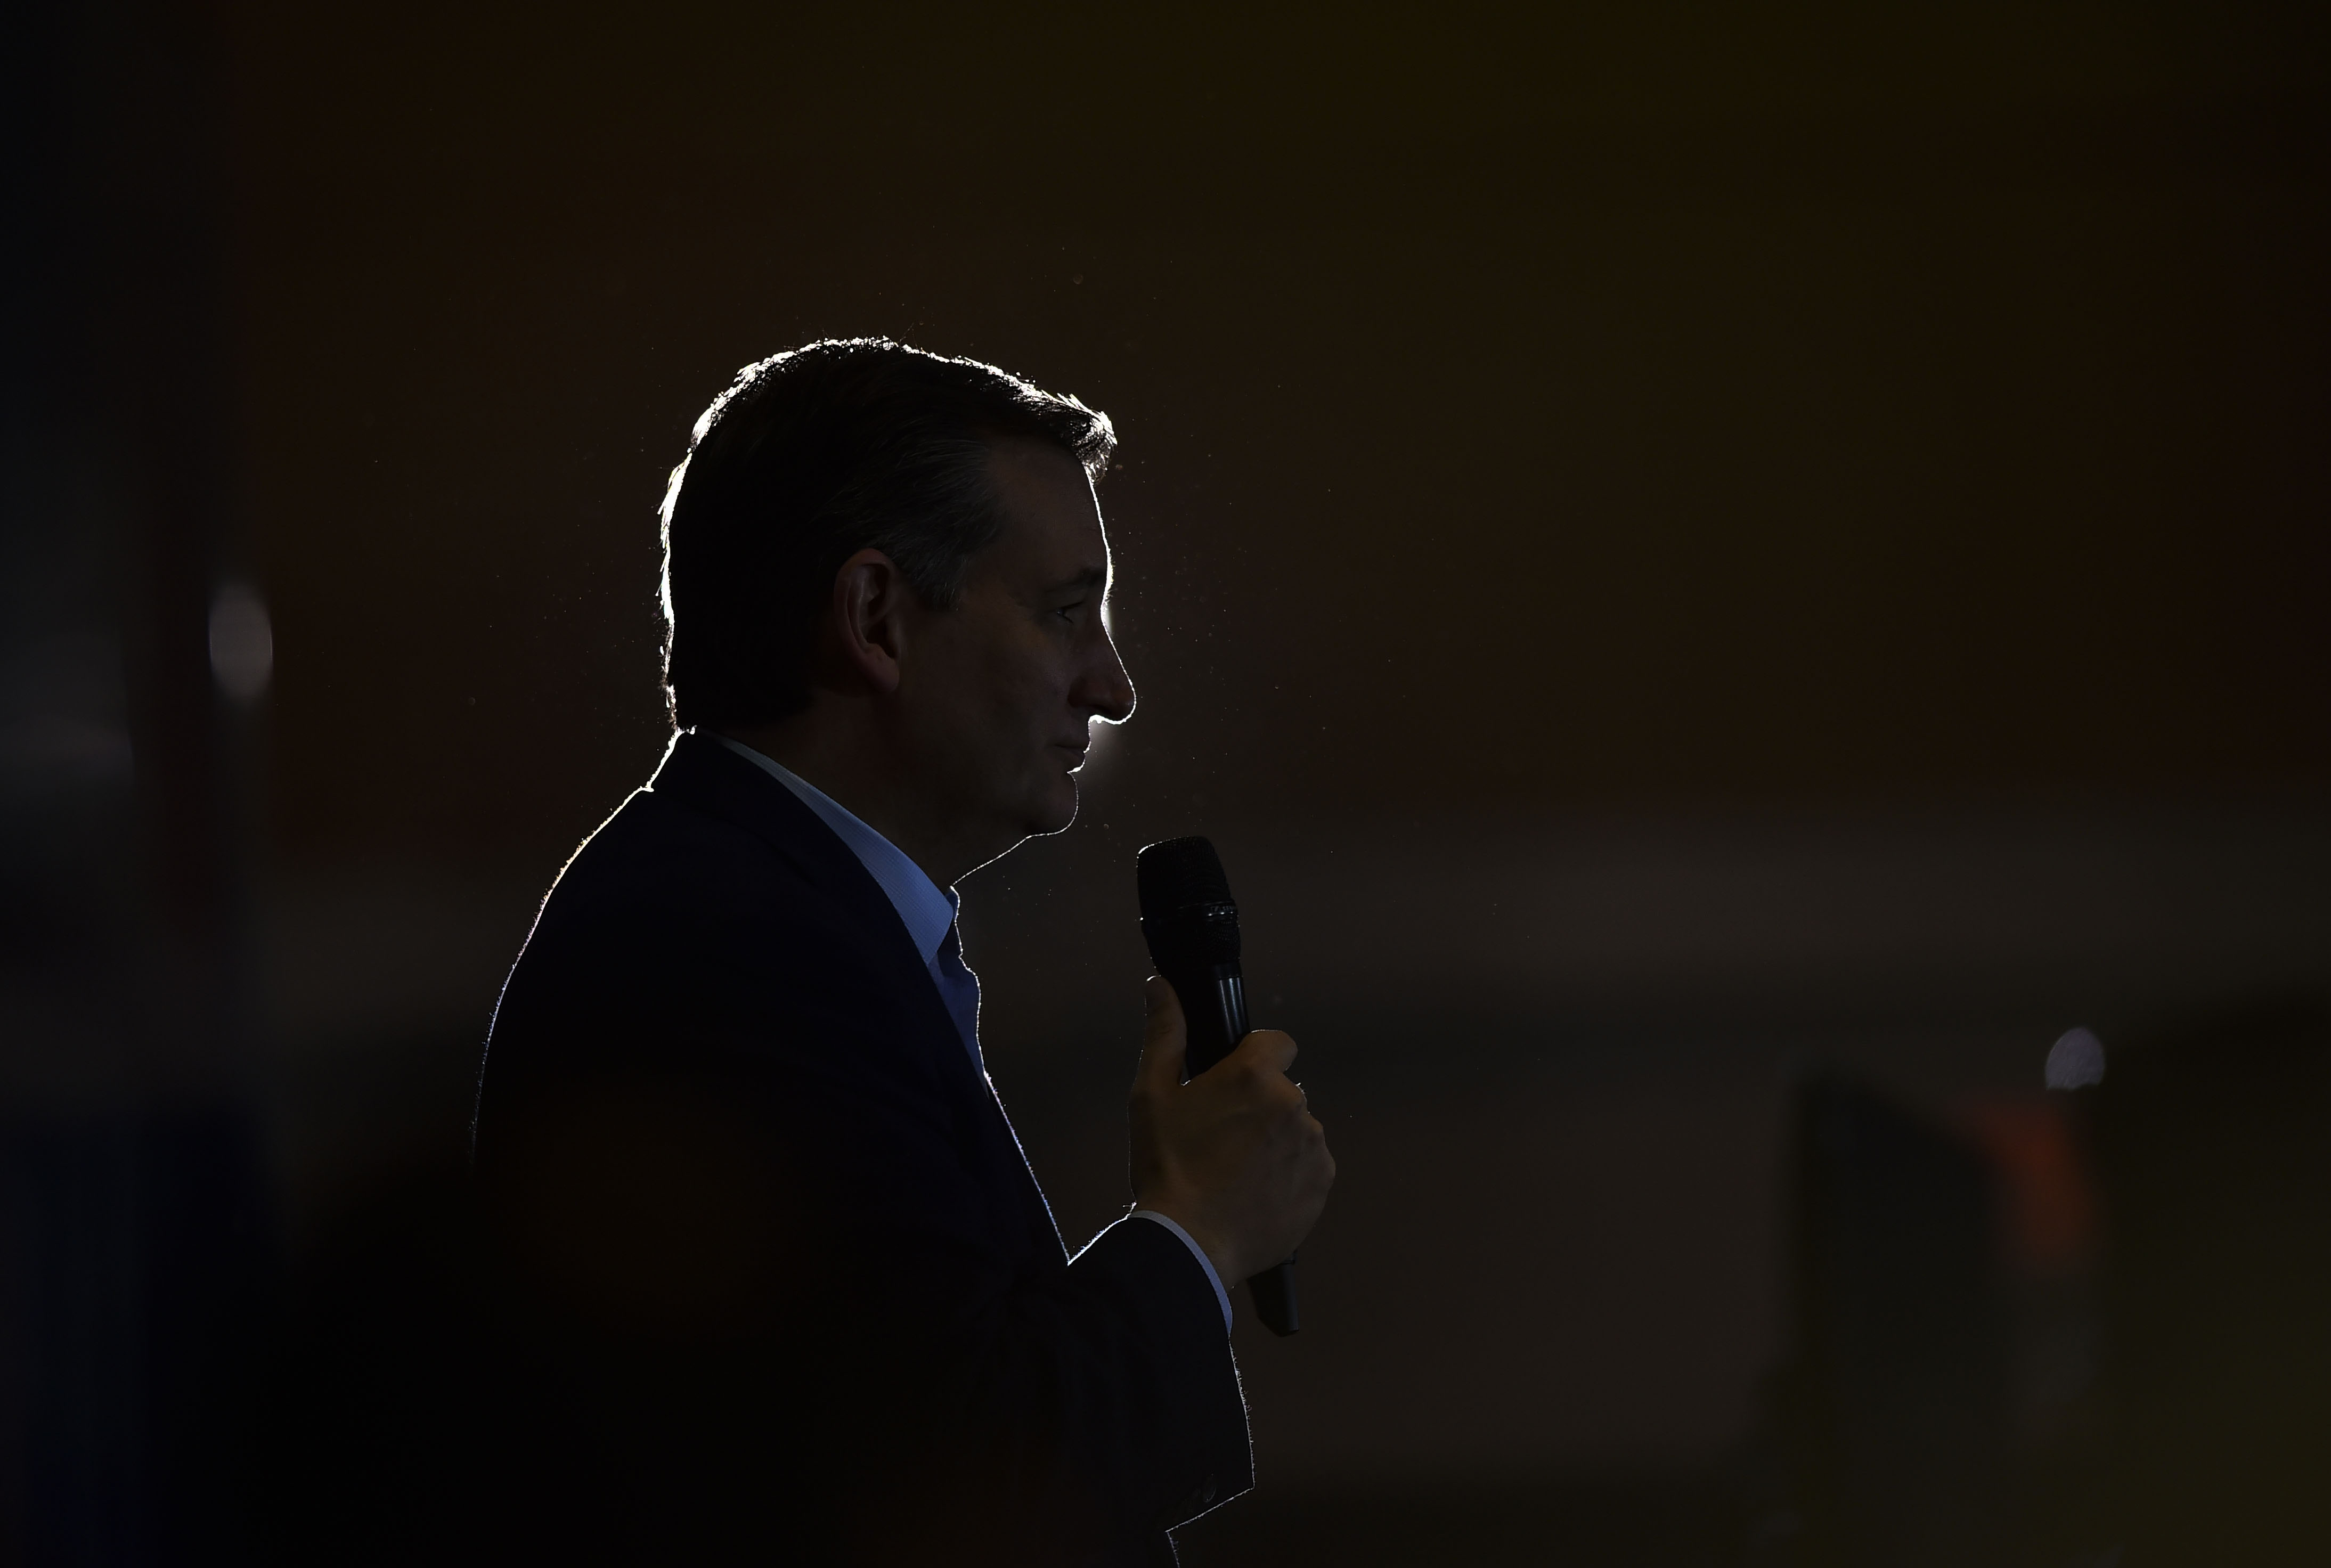 Republican presidential candidate Senator Ted Cruz addresses his supporters during a rally with his vice-presidential running mate, Carly Fiorina, at the Grand Wayne Convention Center in Fort Wayne, Ind., on April 28, 2016 (The Washington Post/Getty Images)